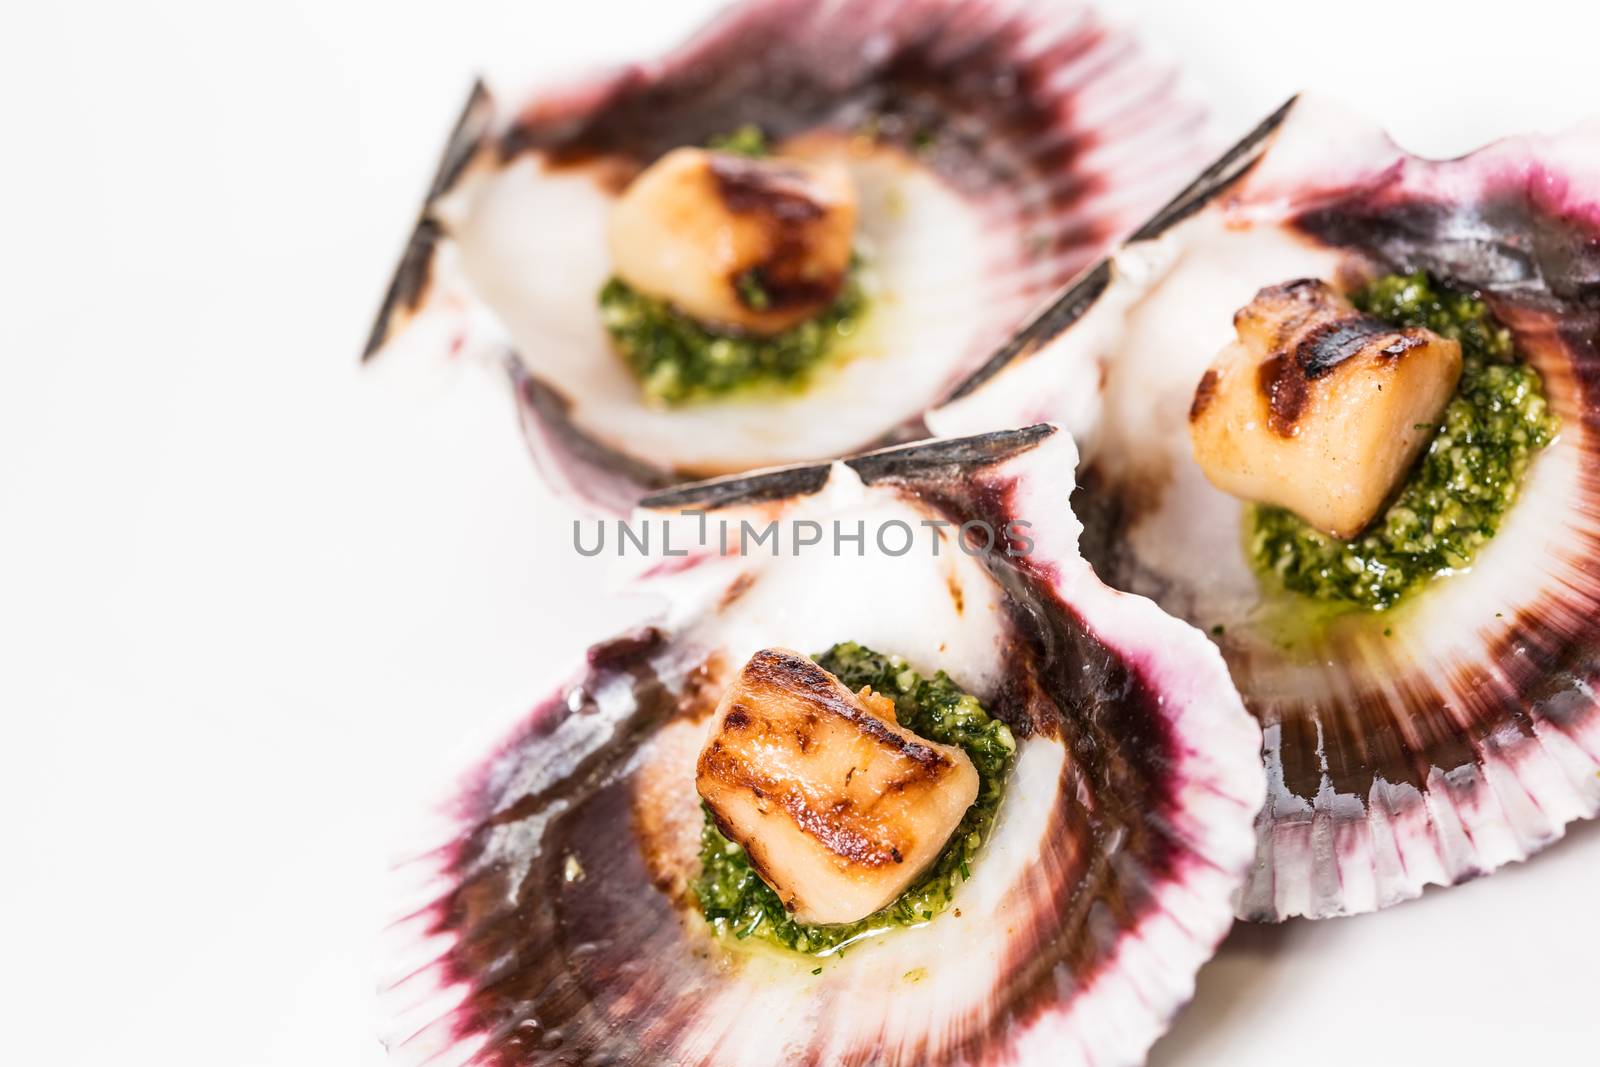 Studio closeup of seared scallops, garnished with pea shoots and served on a bed of green and purple curly lettuces, presented on a scallop shell.